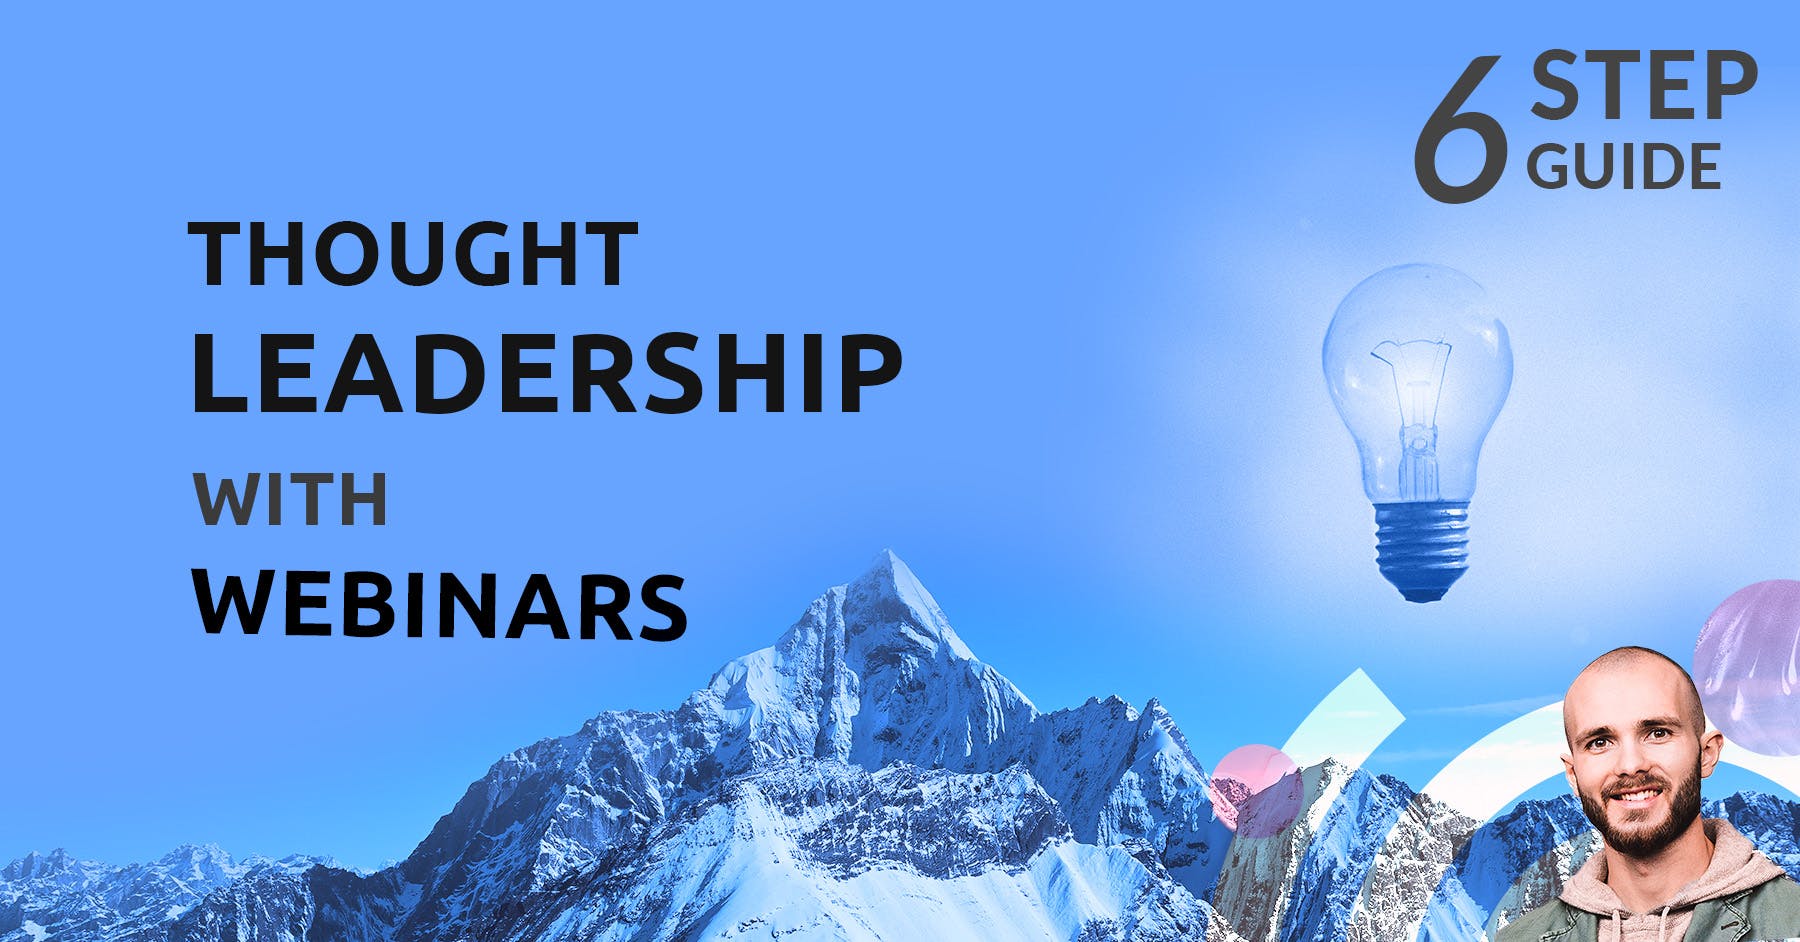 A webinar is one of the best ways to position yourself and your brand as a thought leader within your industry. You can share your expertise or host a panel of established movers and shakers in your field. In this article, we will go through how a webinar will bring your thought leadership content to life.